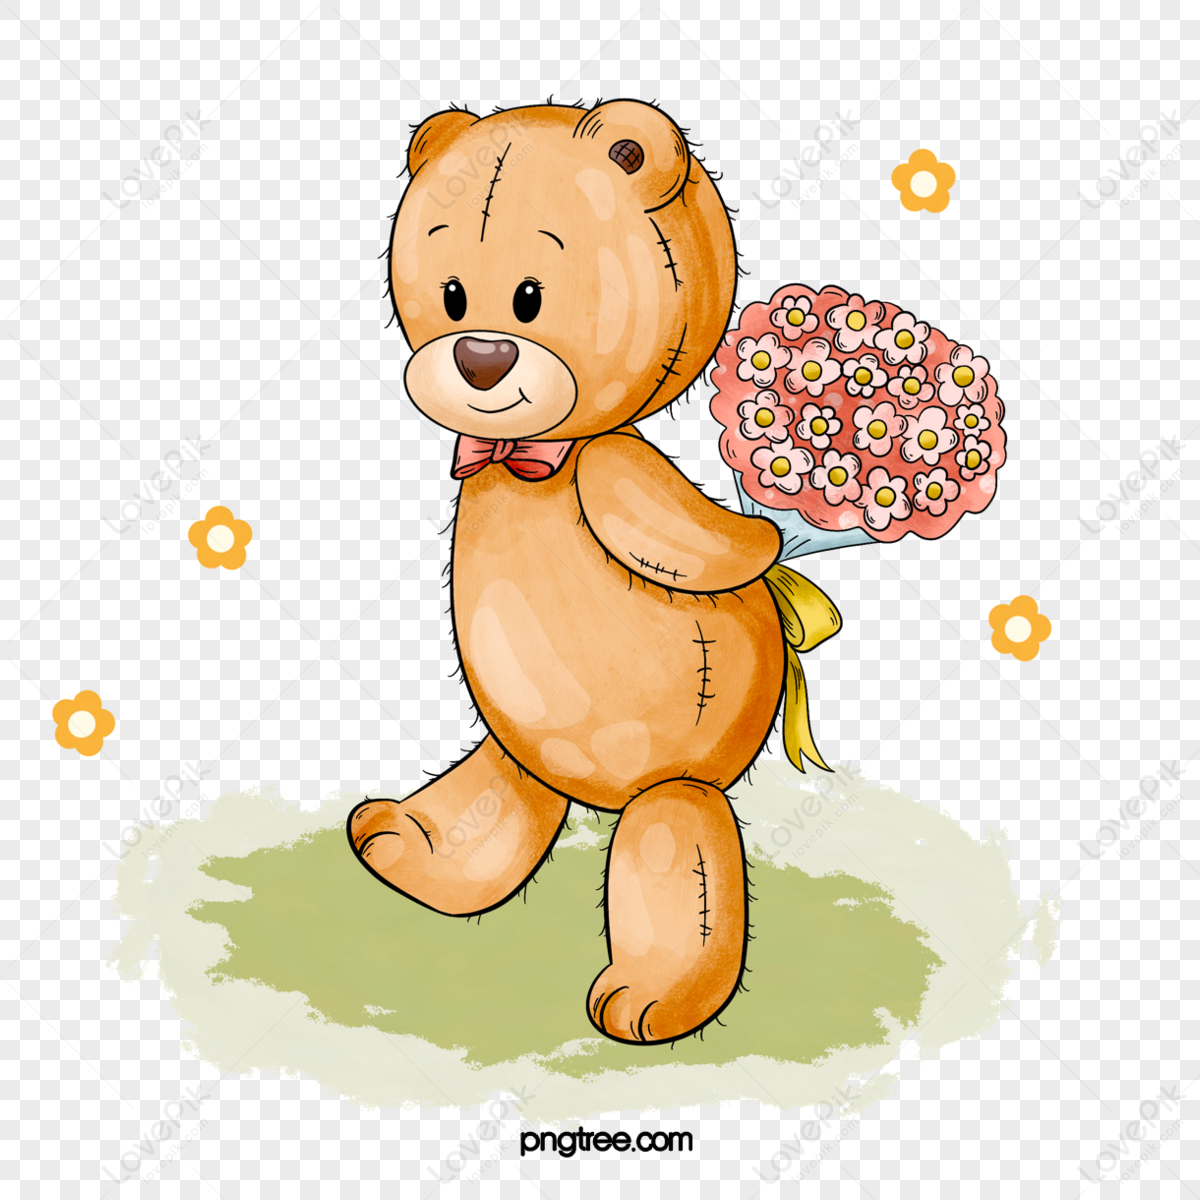 Cute style happy birthday teddy bear element,toy,animal png image